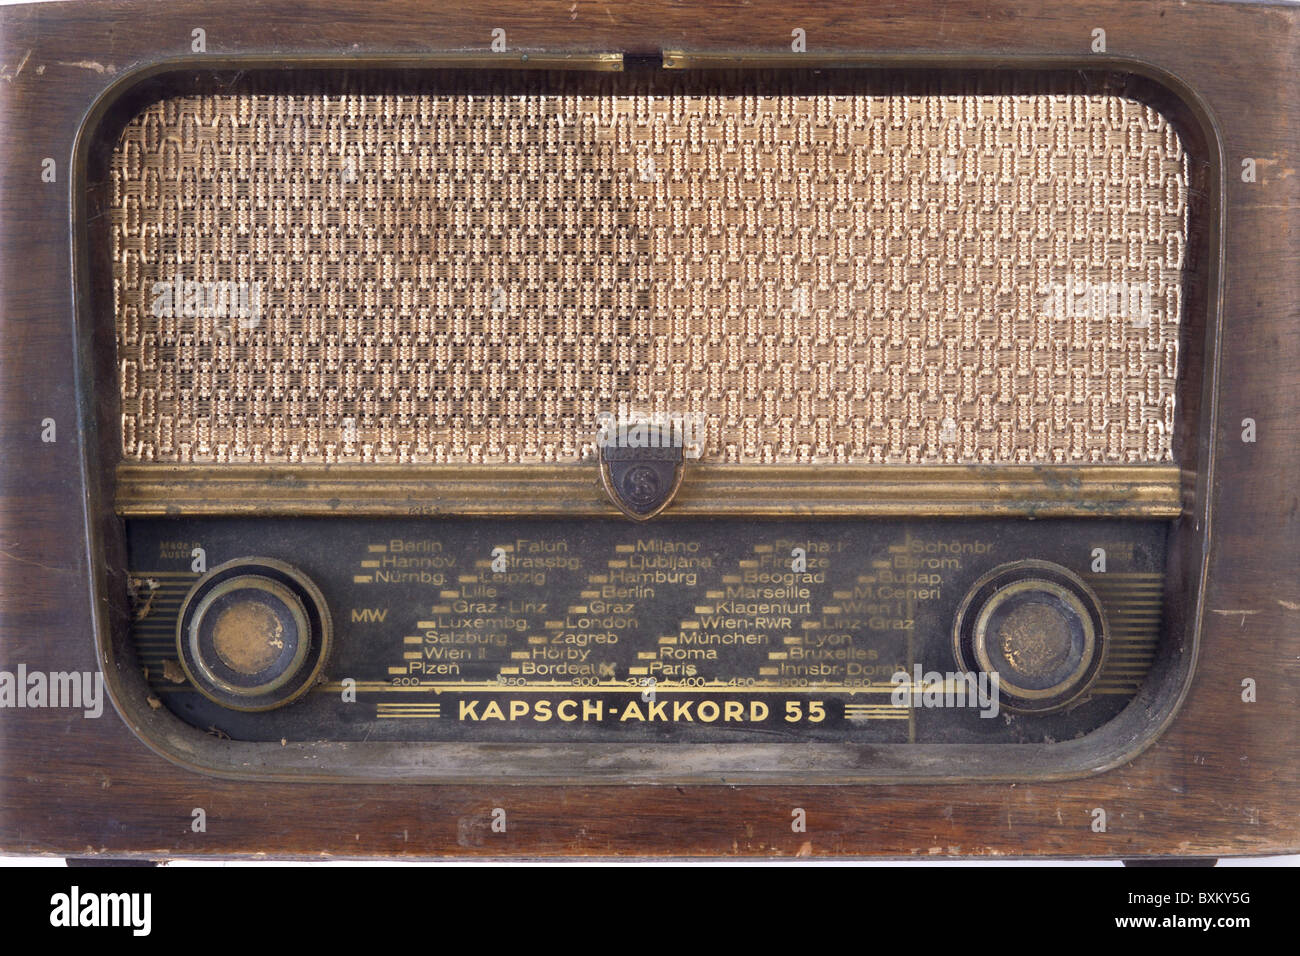 broadcast, radio set, Kapsch Akkord 55, Austria, 1954, dirty, defect,  e-waste, electronic, technics, Austrian, design, Gelsenkirchen Baroque,  front panel, 1950s, 50s, 20th century, historic, historical,  Additional-Rights-Clearences-Not Available Stock ...